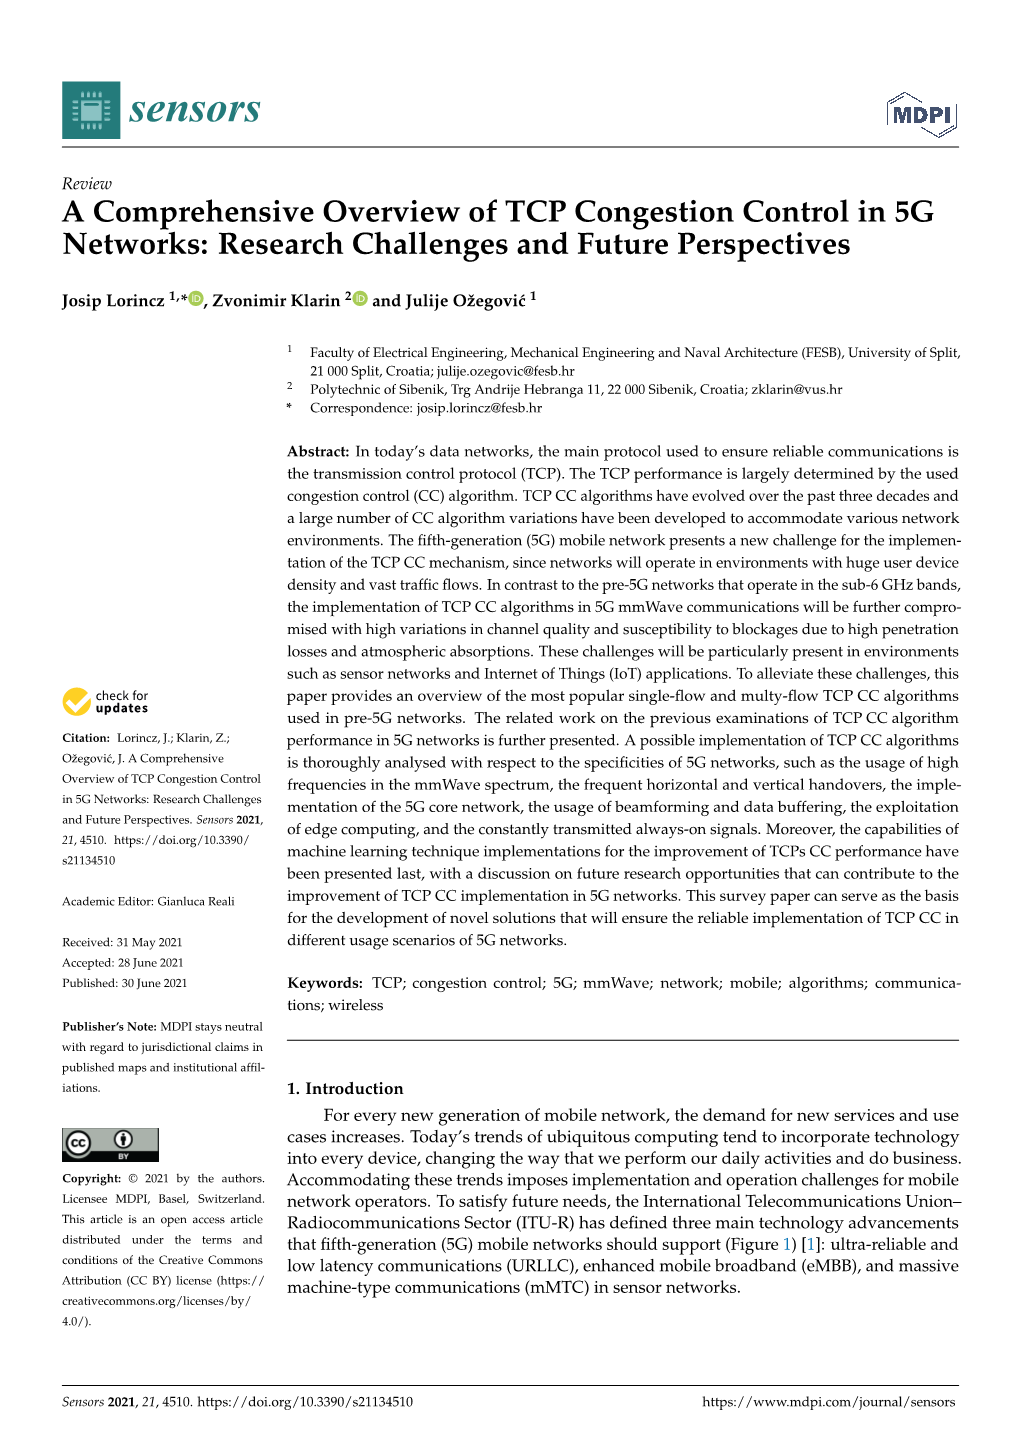 A Comprehensive Overview of TCP Congestion Control in 5G Networks: Research Challenges and Future Perspectives